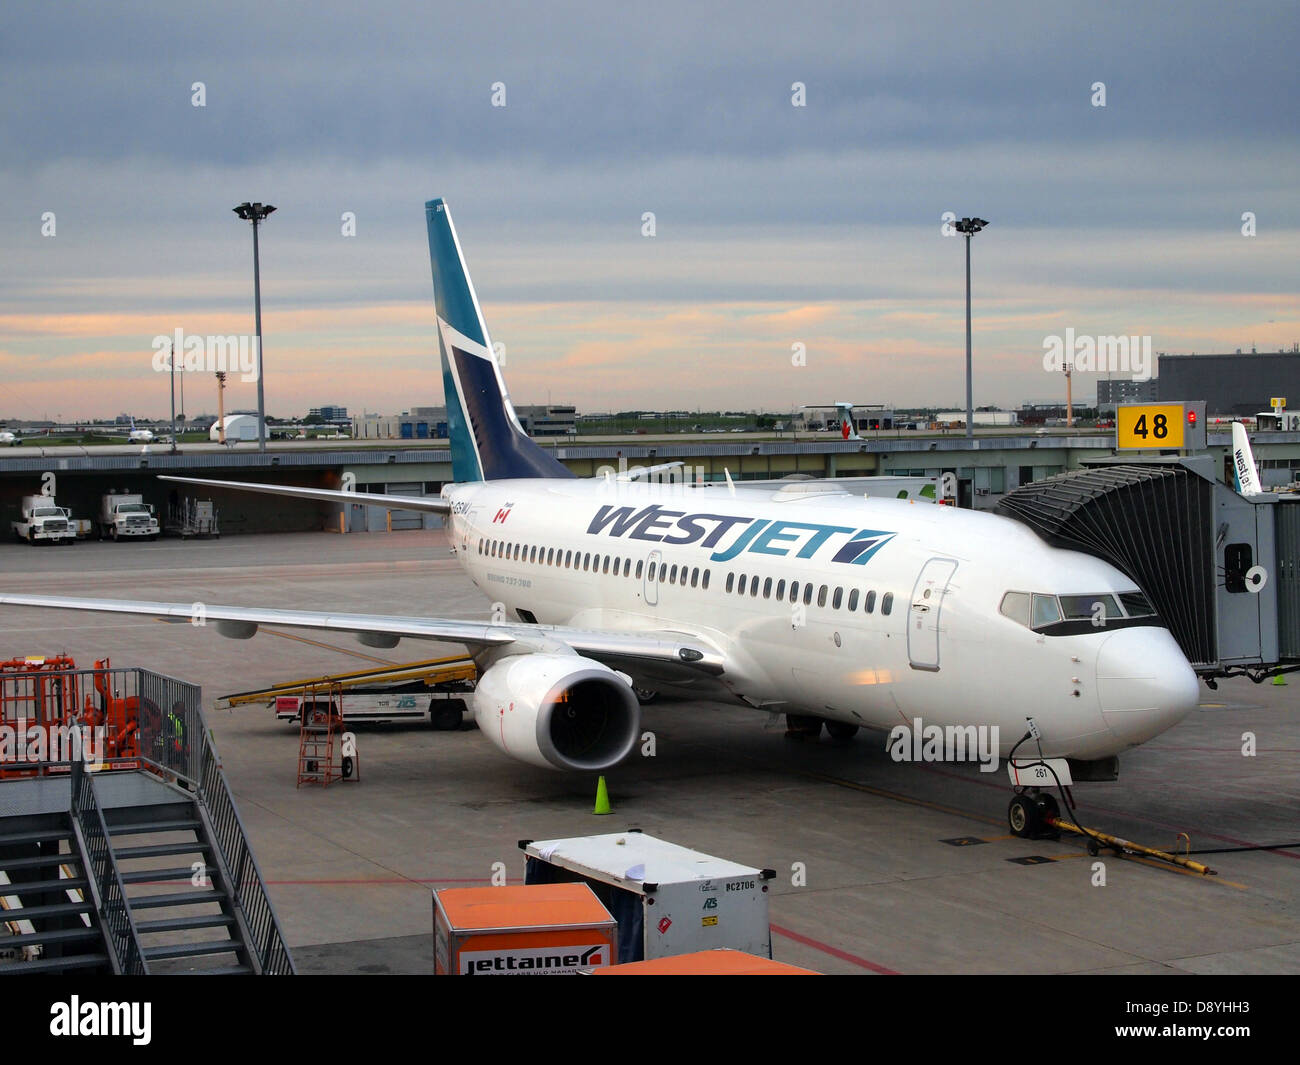 Budget Canadian airline, Westjet plane at Montreal airport, Quebec, Canada Stock Photo